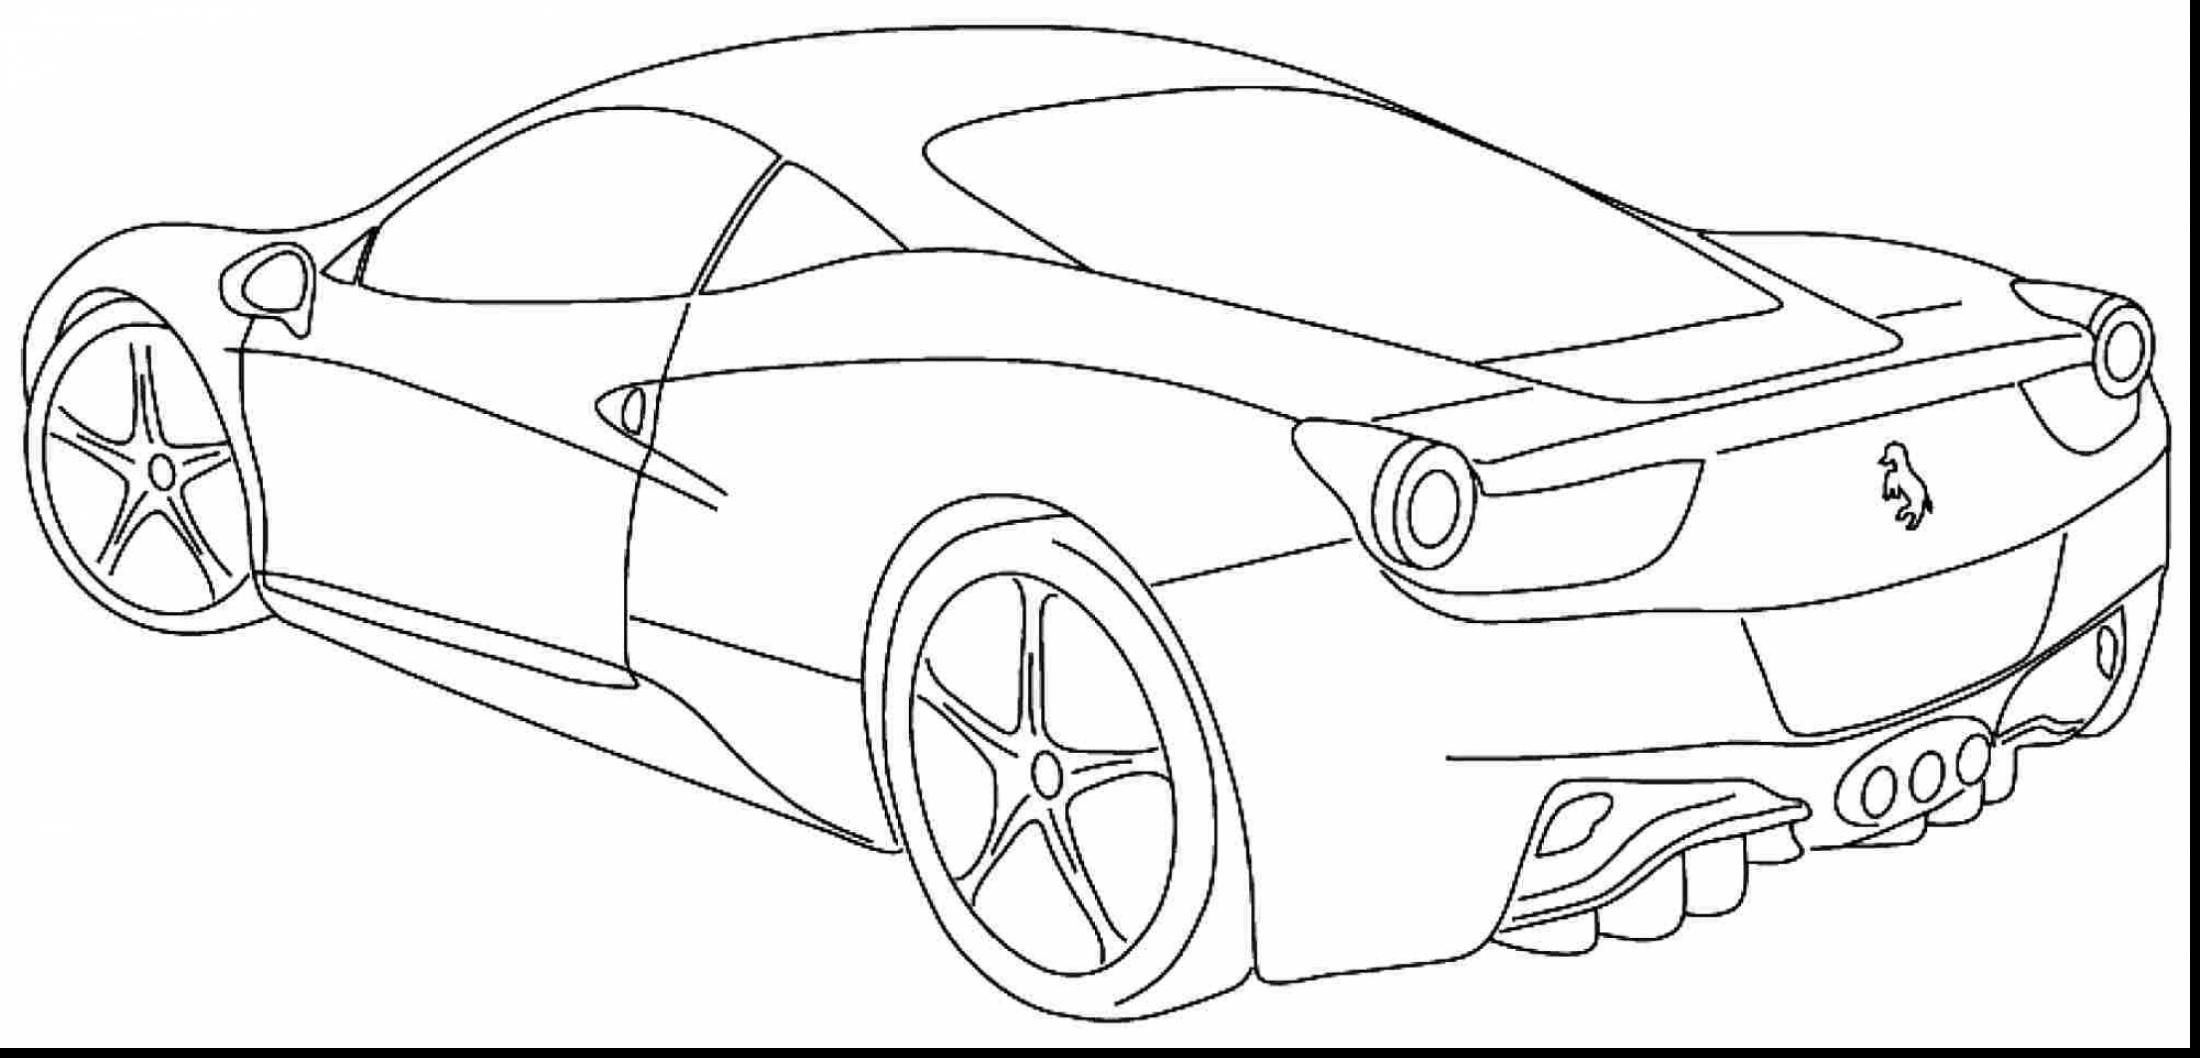 Coloring Pages : Sports Car Coloring Pages Printable Race ...